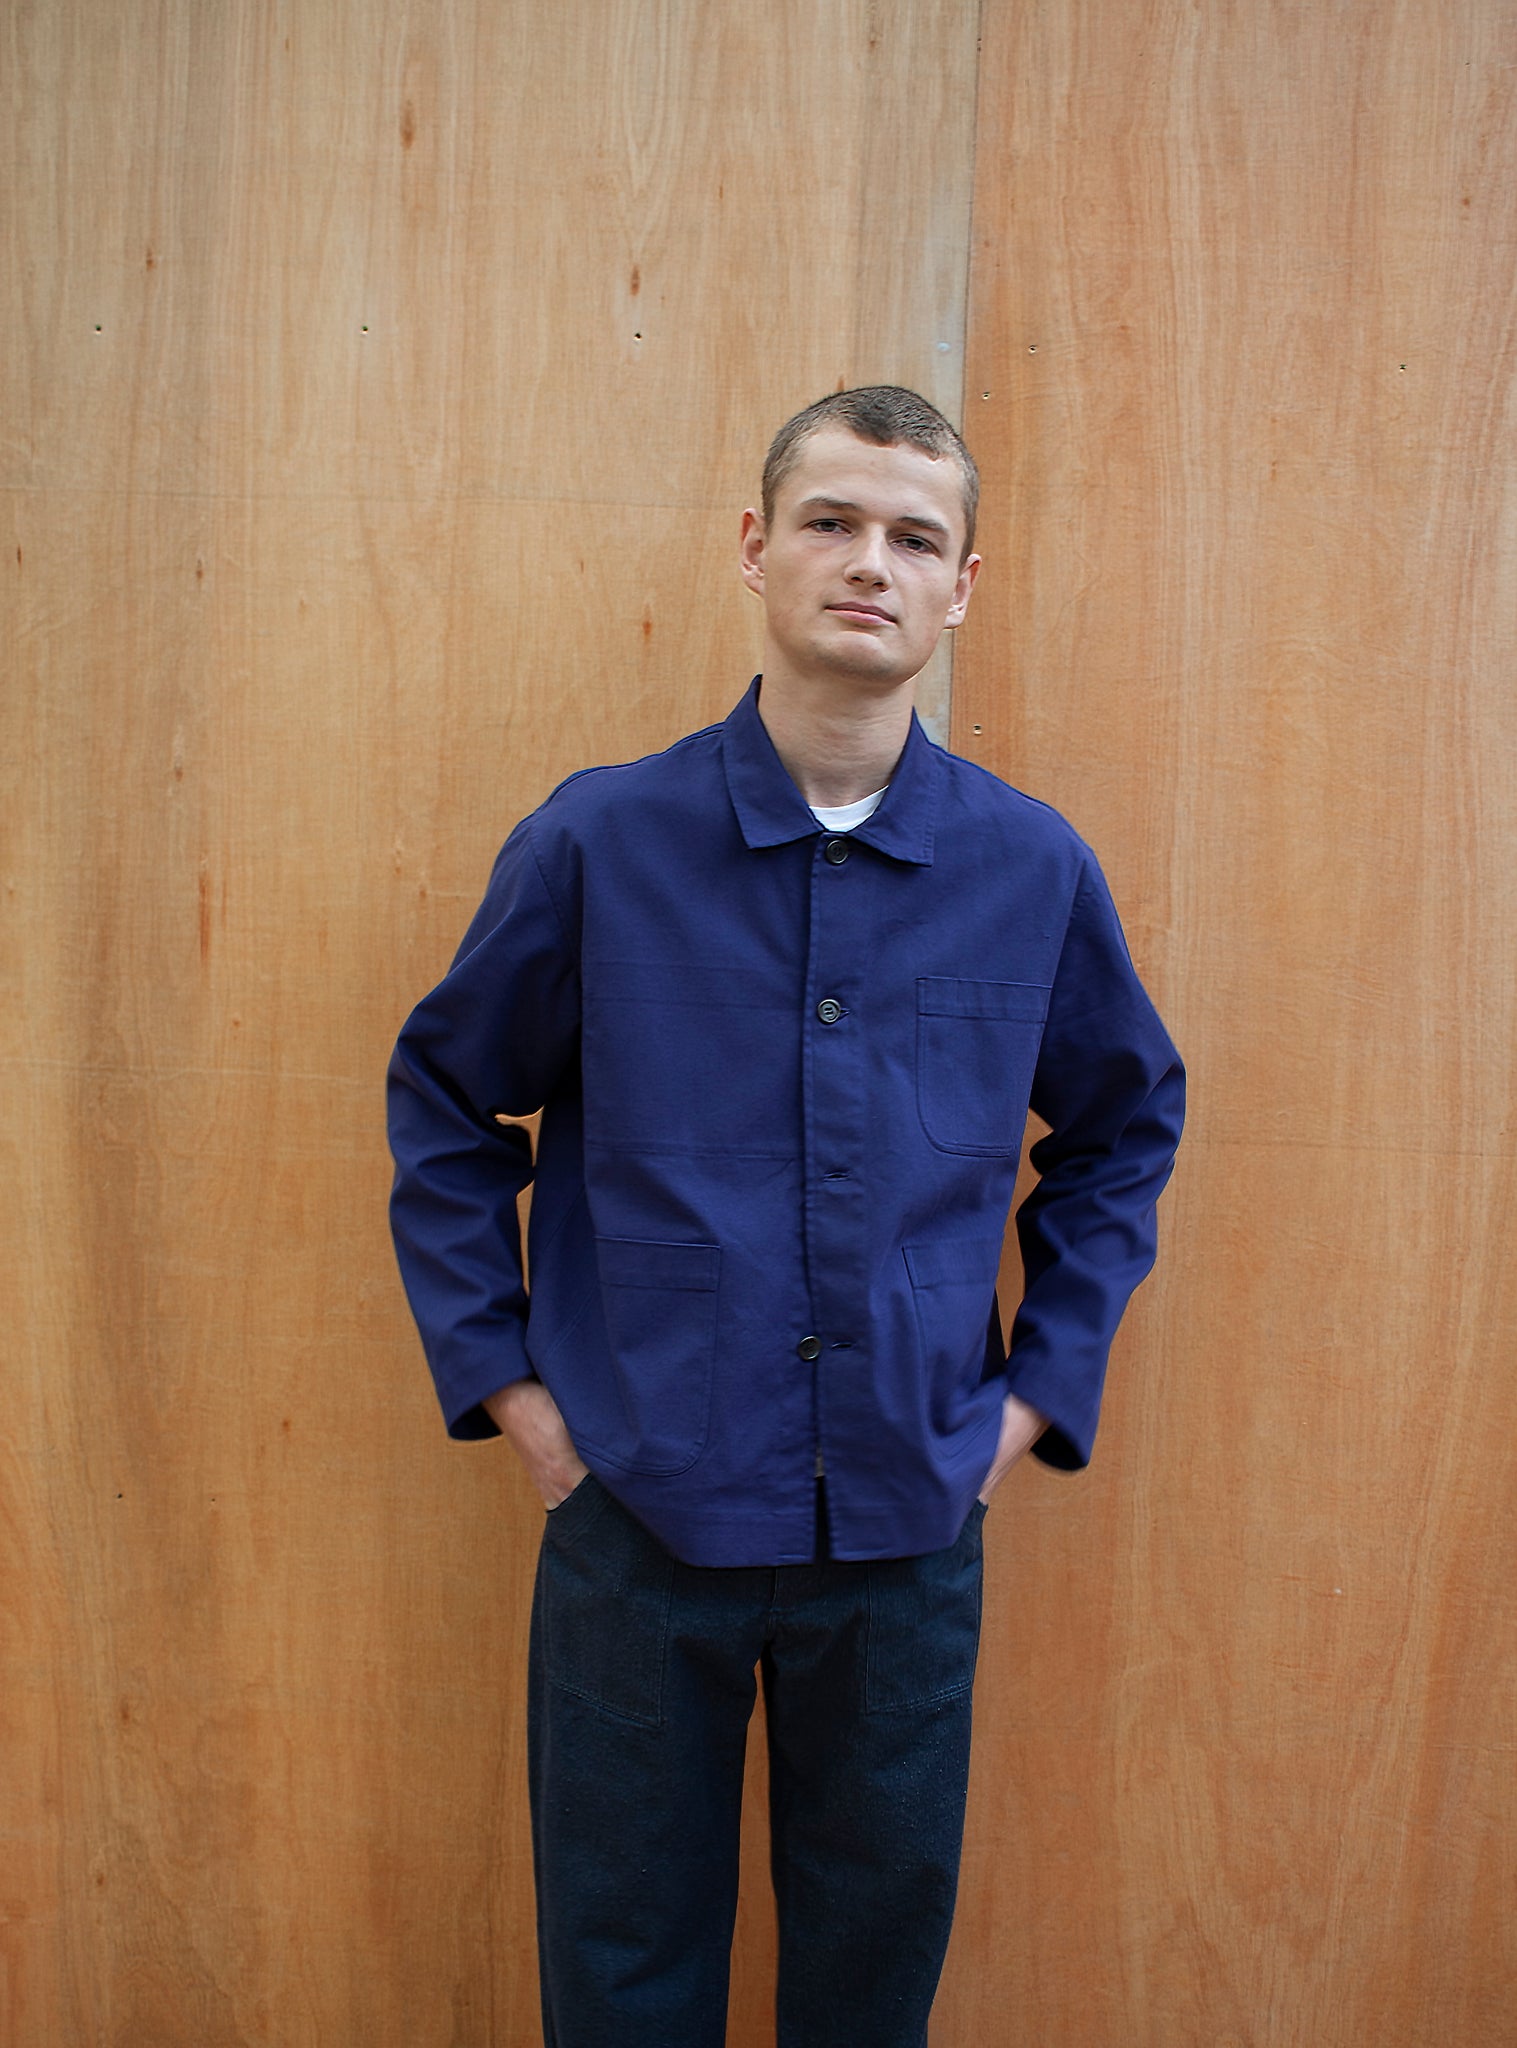 a young man standing against a wooden wall wearing a traditional chore jacket made in an indigo brushed cotton canvas